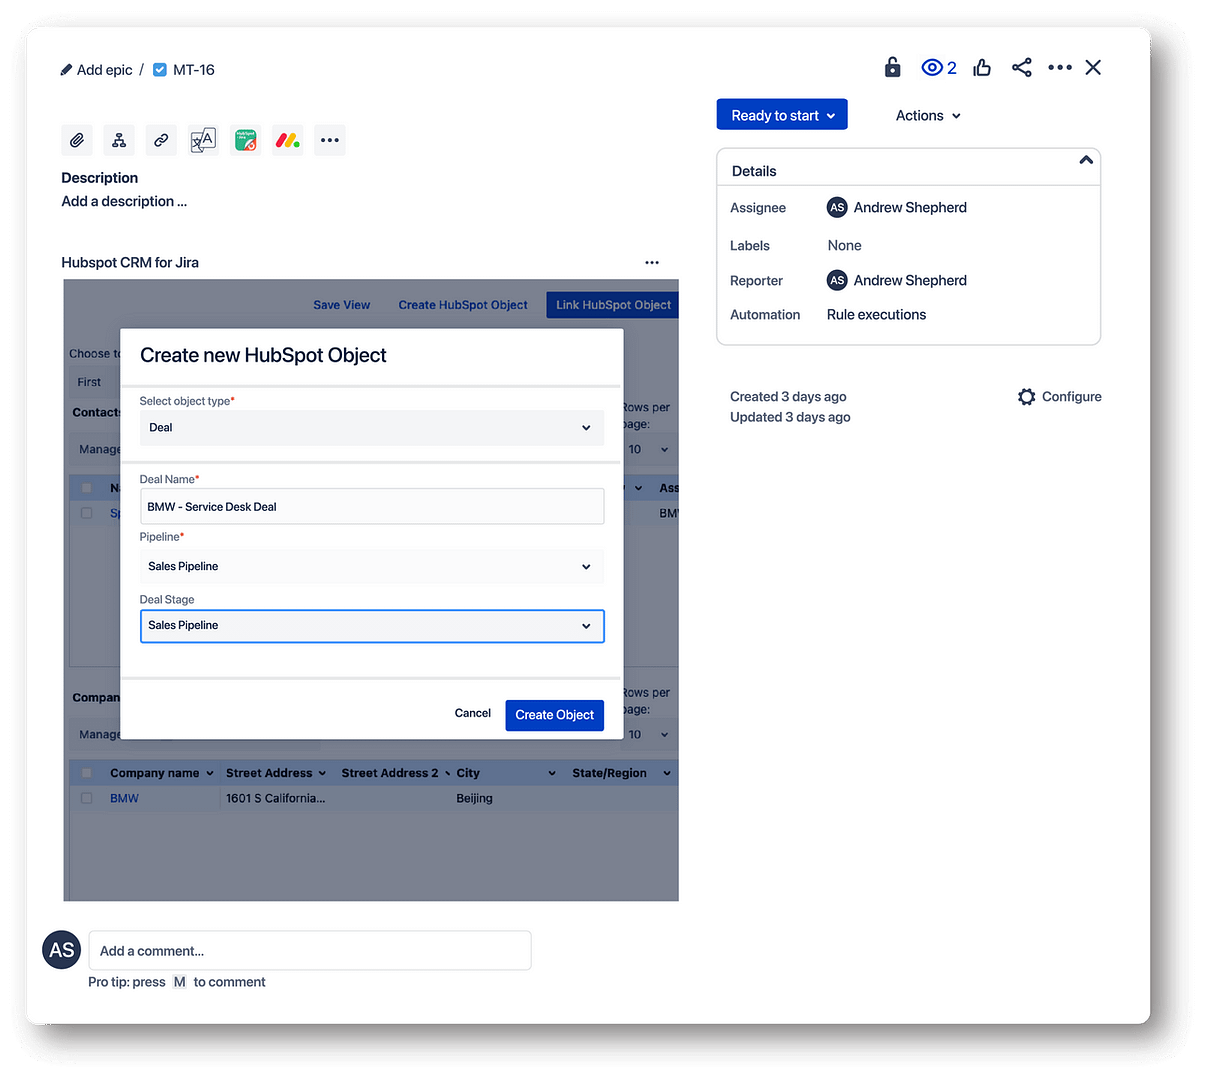 Teams without access to HubSpot can create HubSpot objects such as Contacts, Companies, Deals and Tickets directly from Jira.